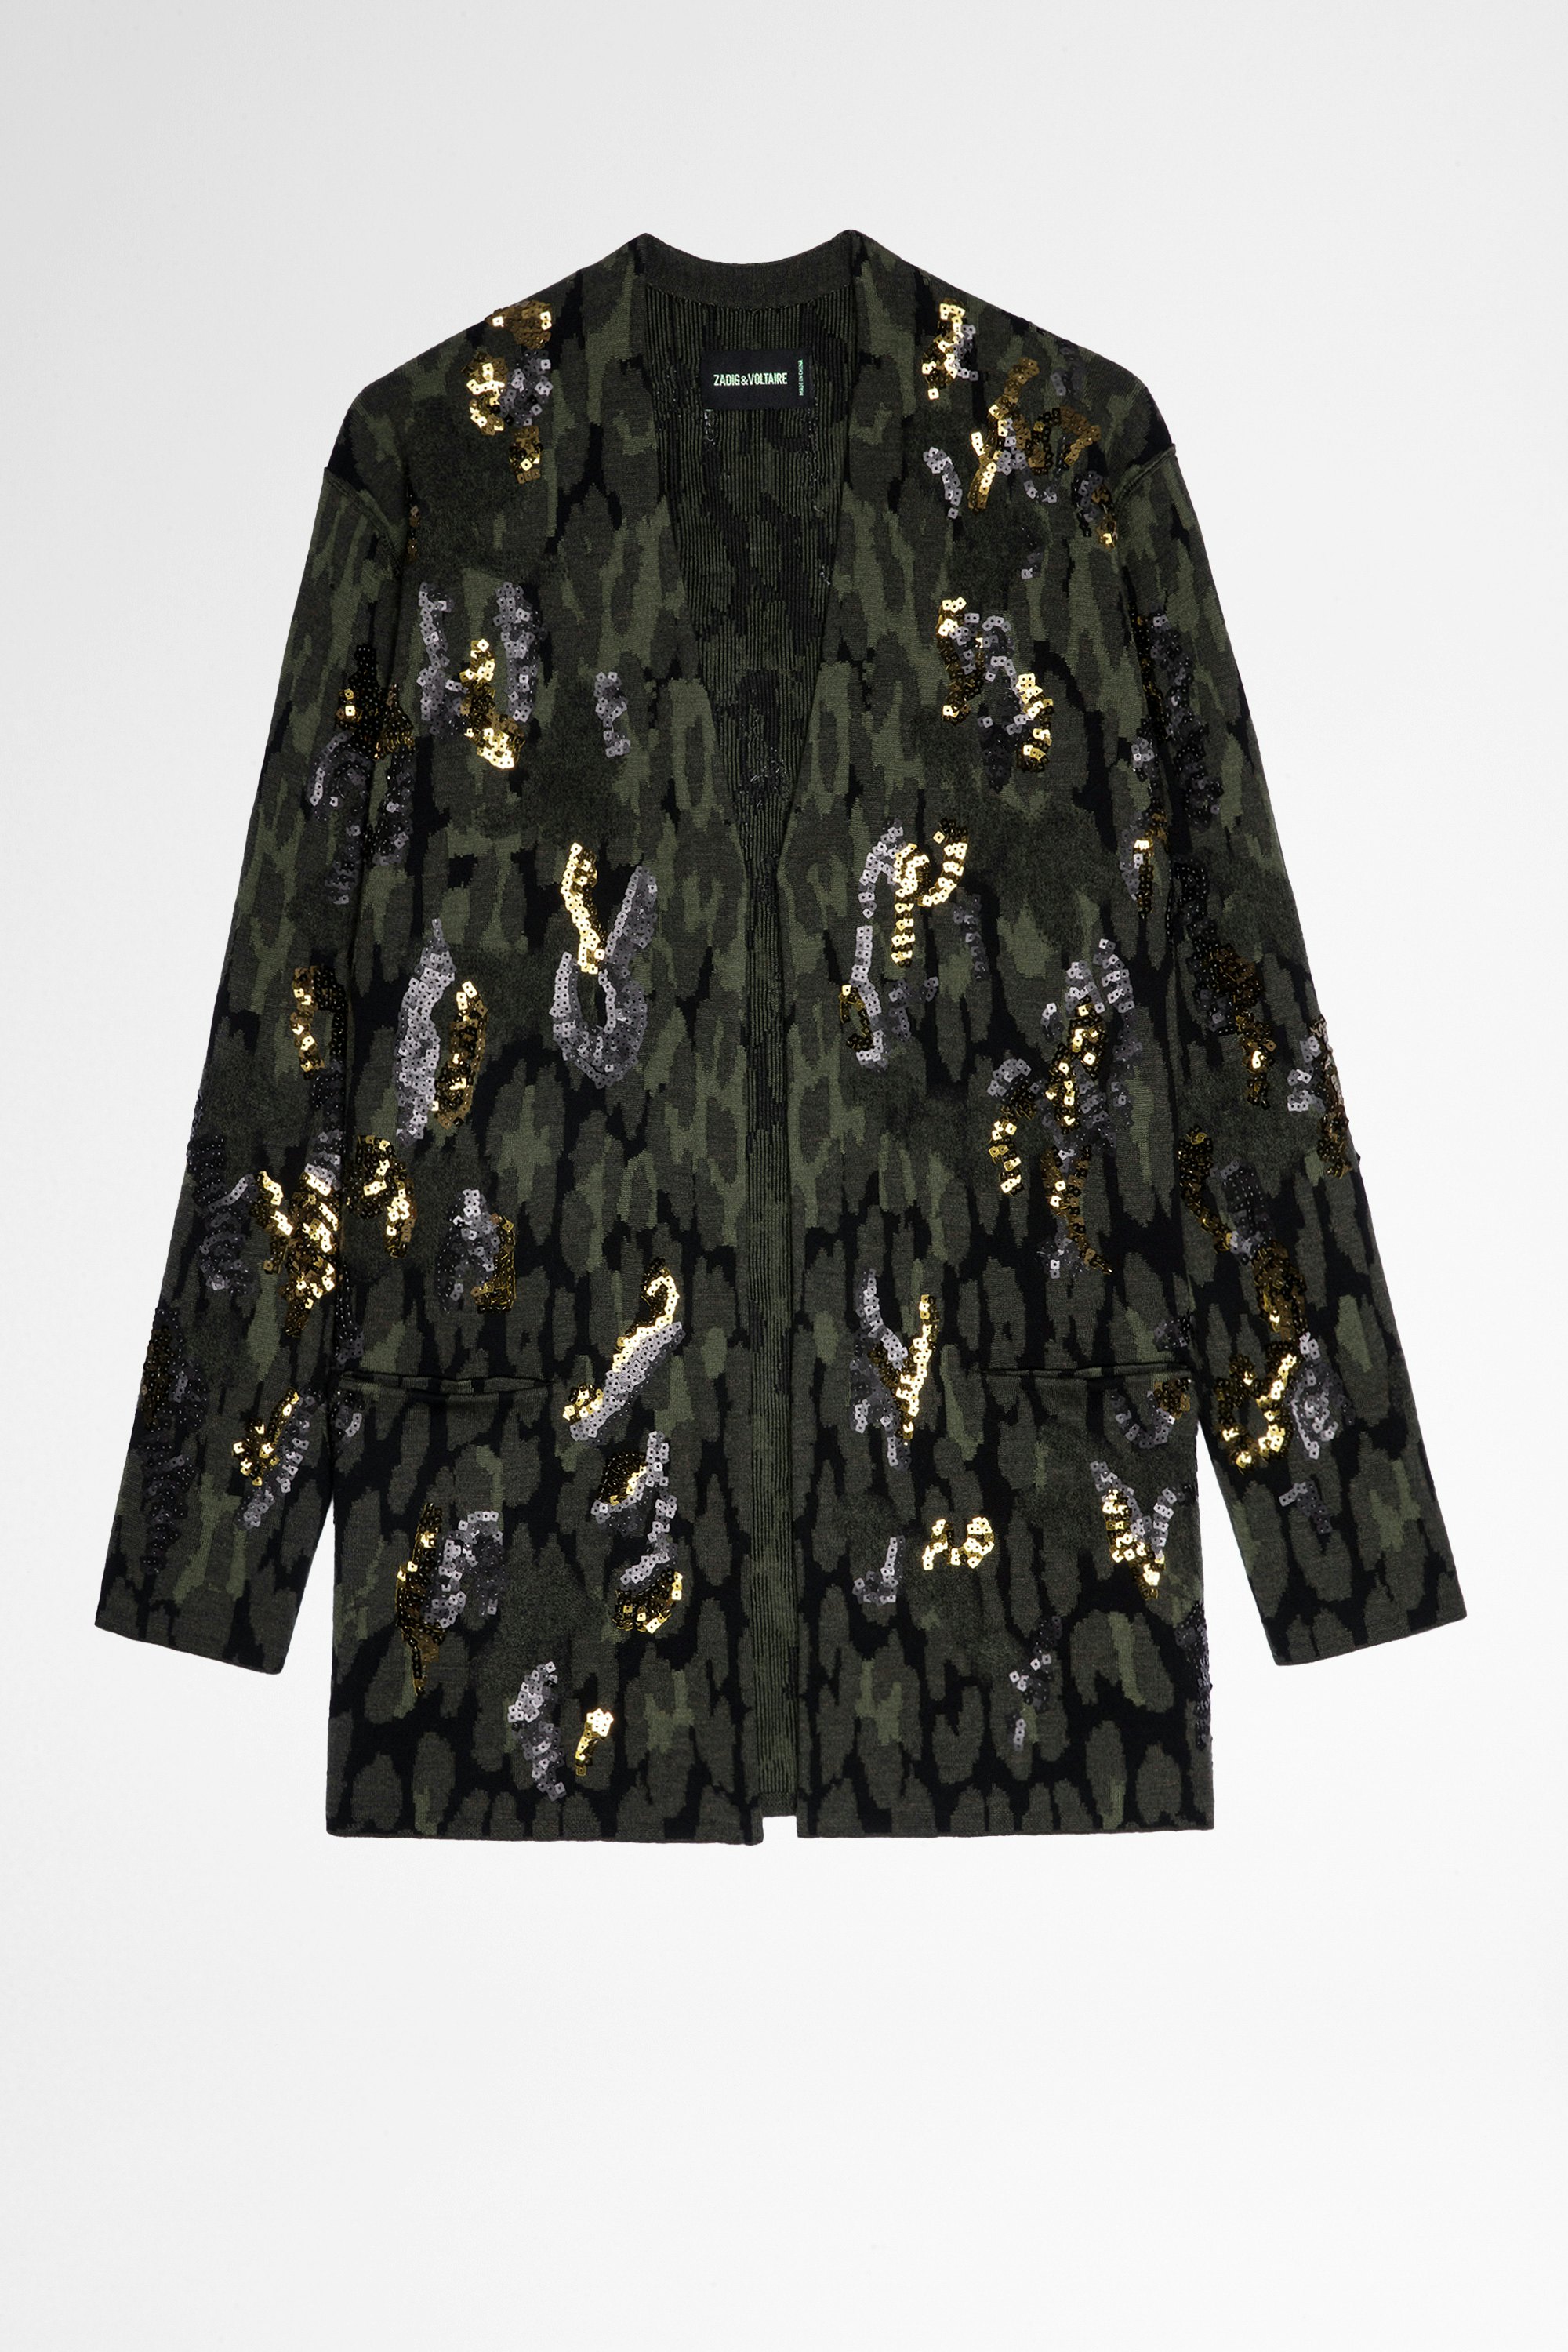 Addison ジャケット Women's khaki knitted jacket with sequins and camouflage print